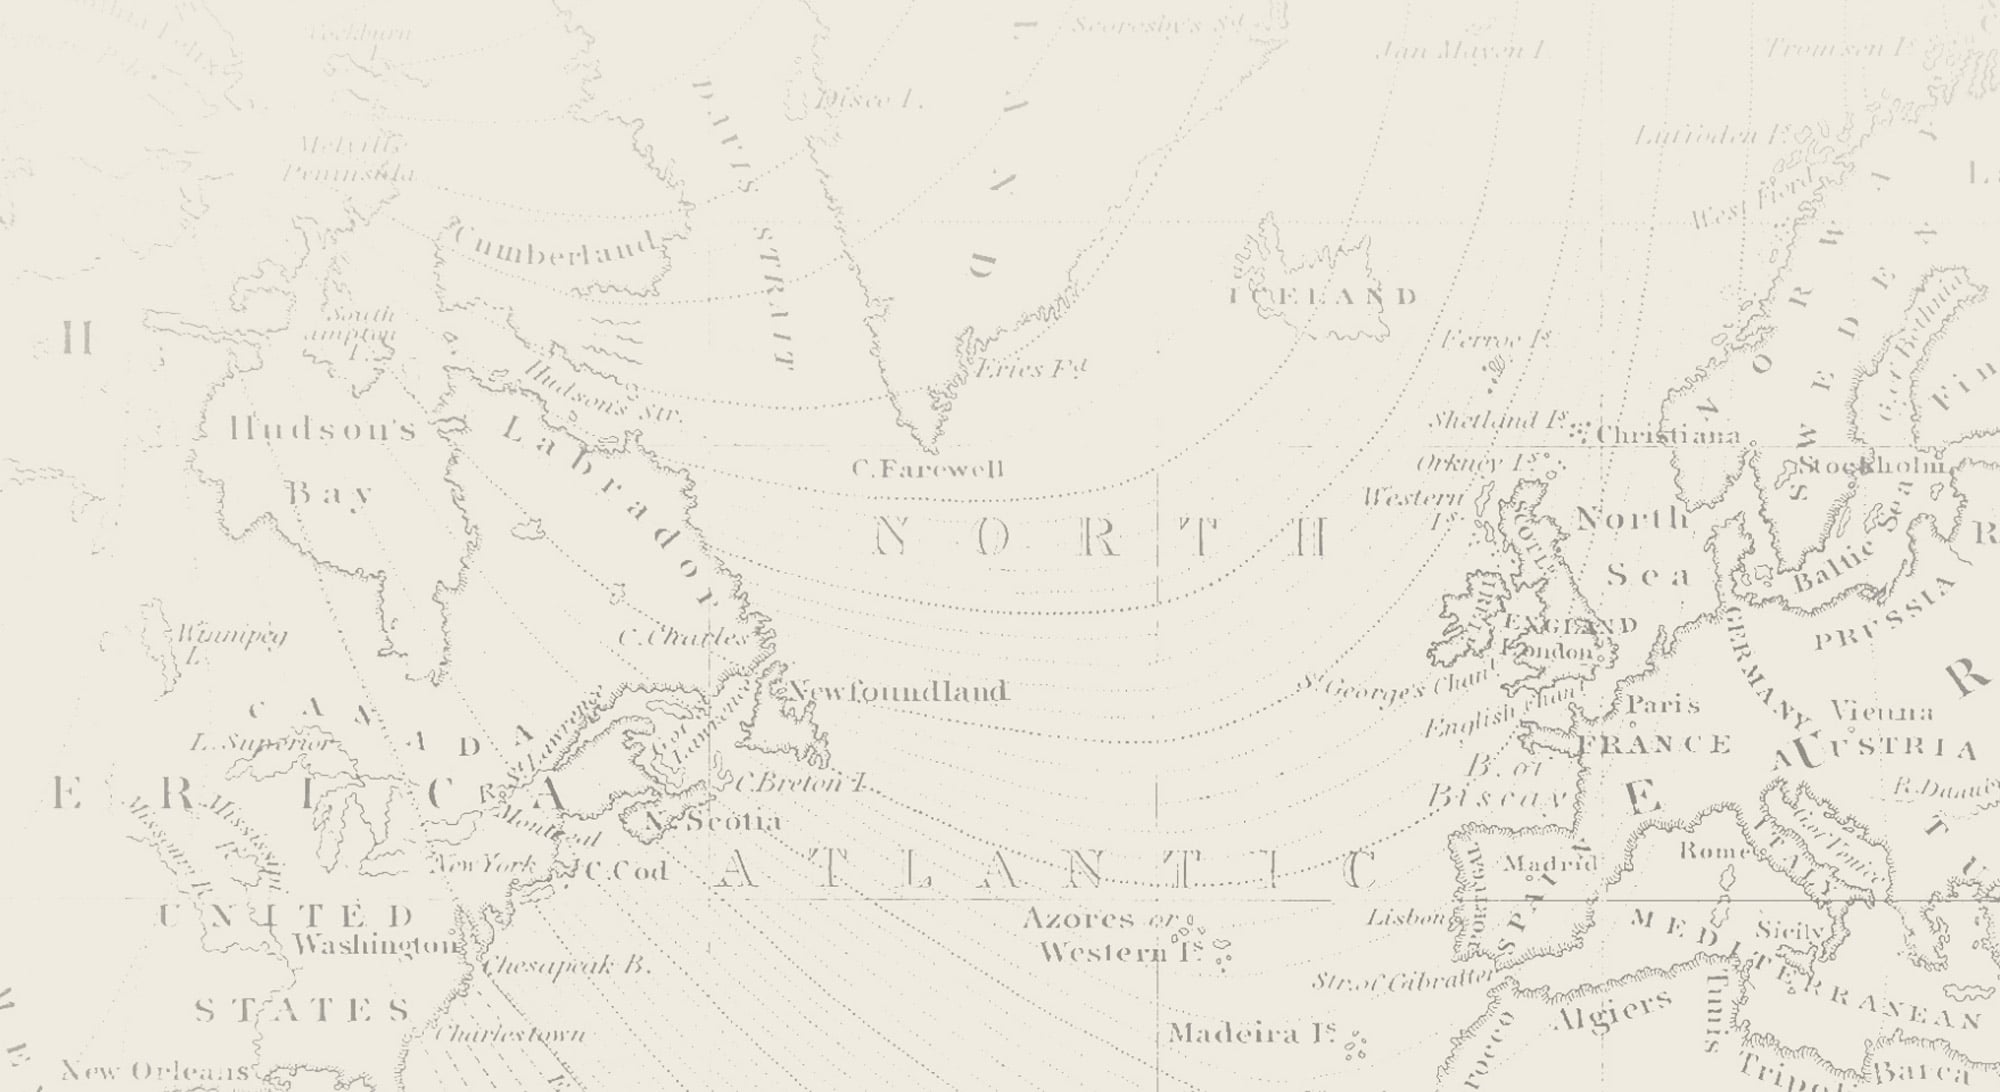 old map of the north atlantic